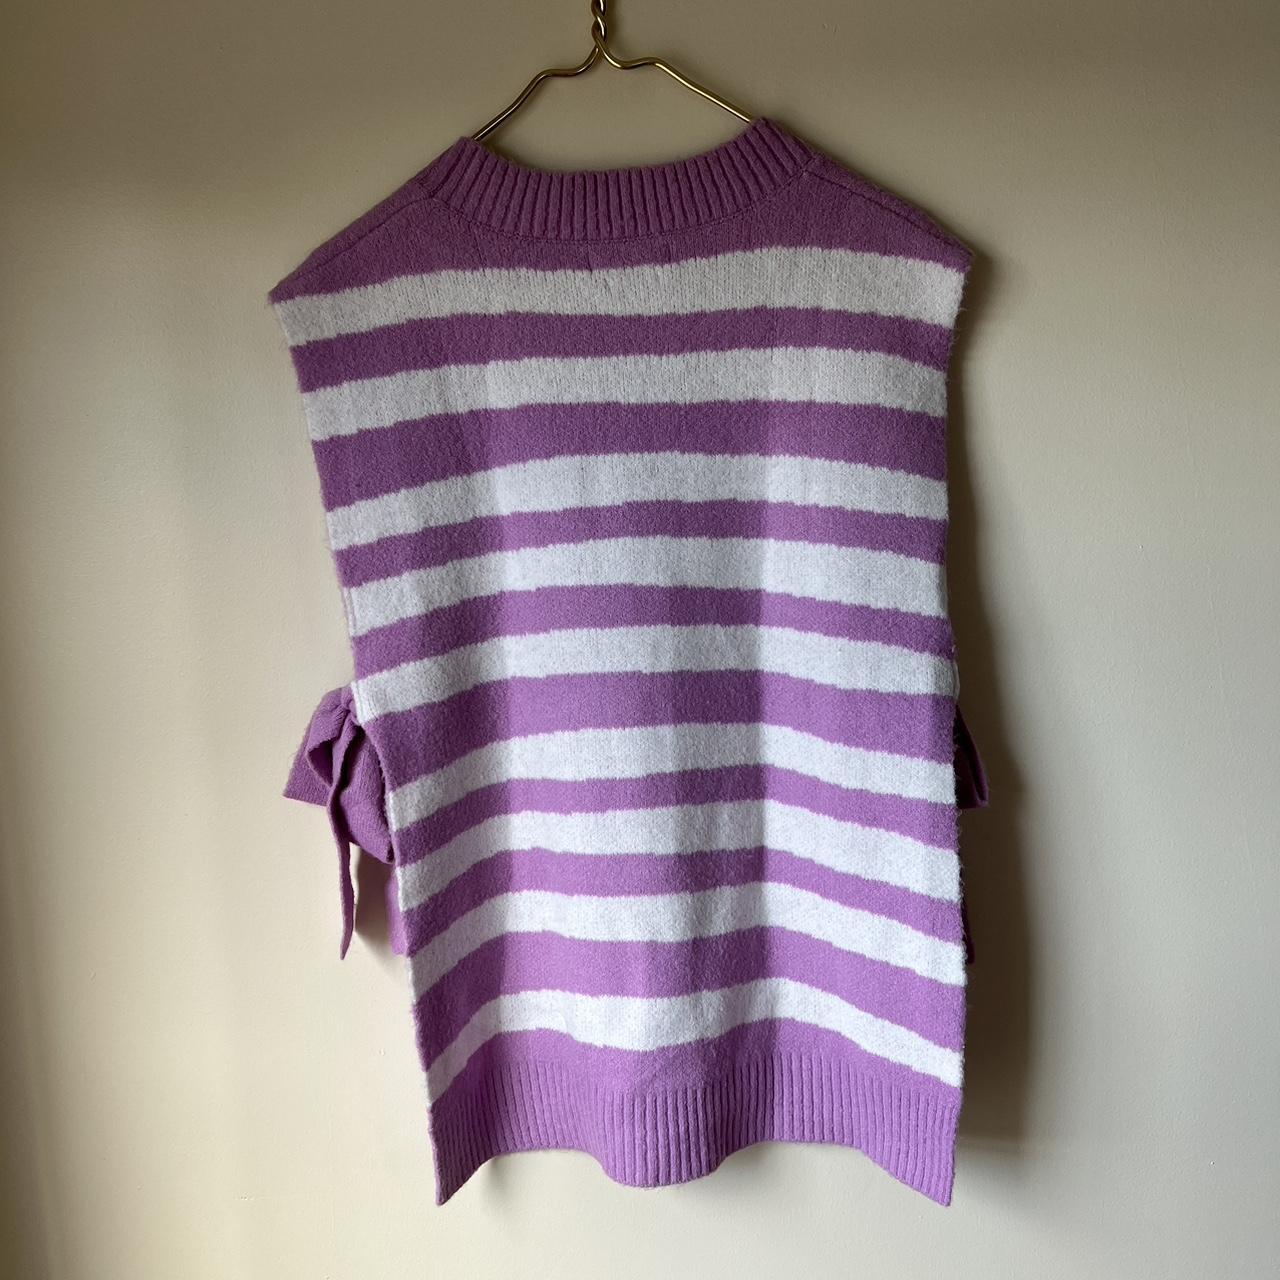 Native Youth Women's Purple and White Jumper (3)